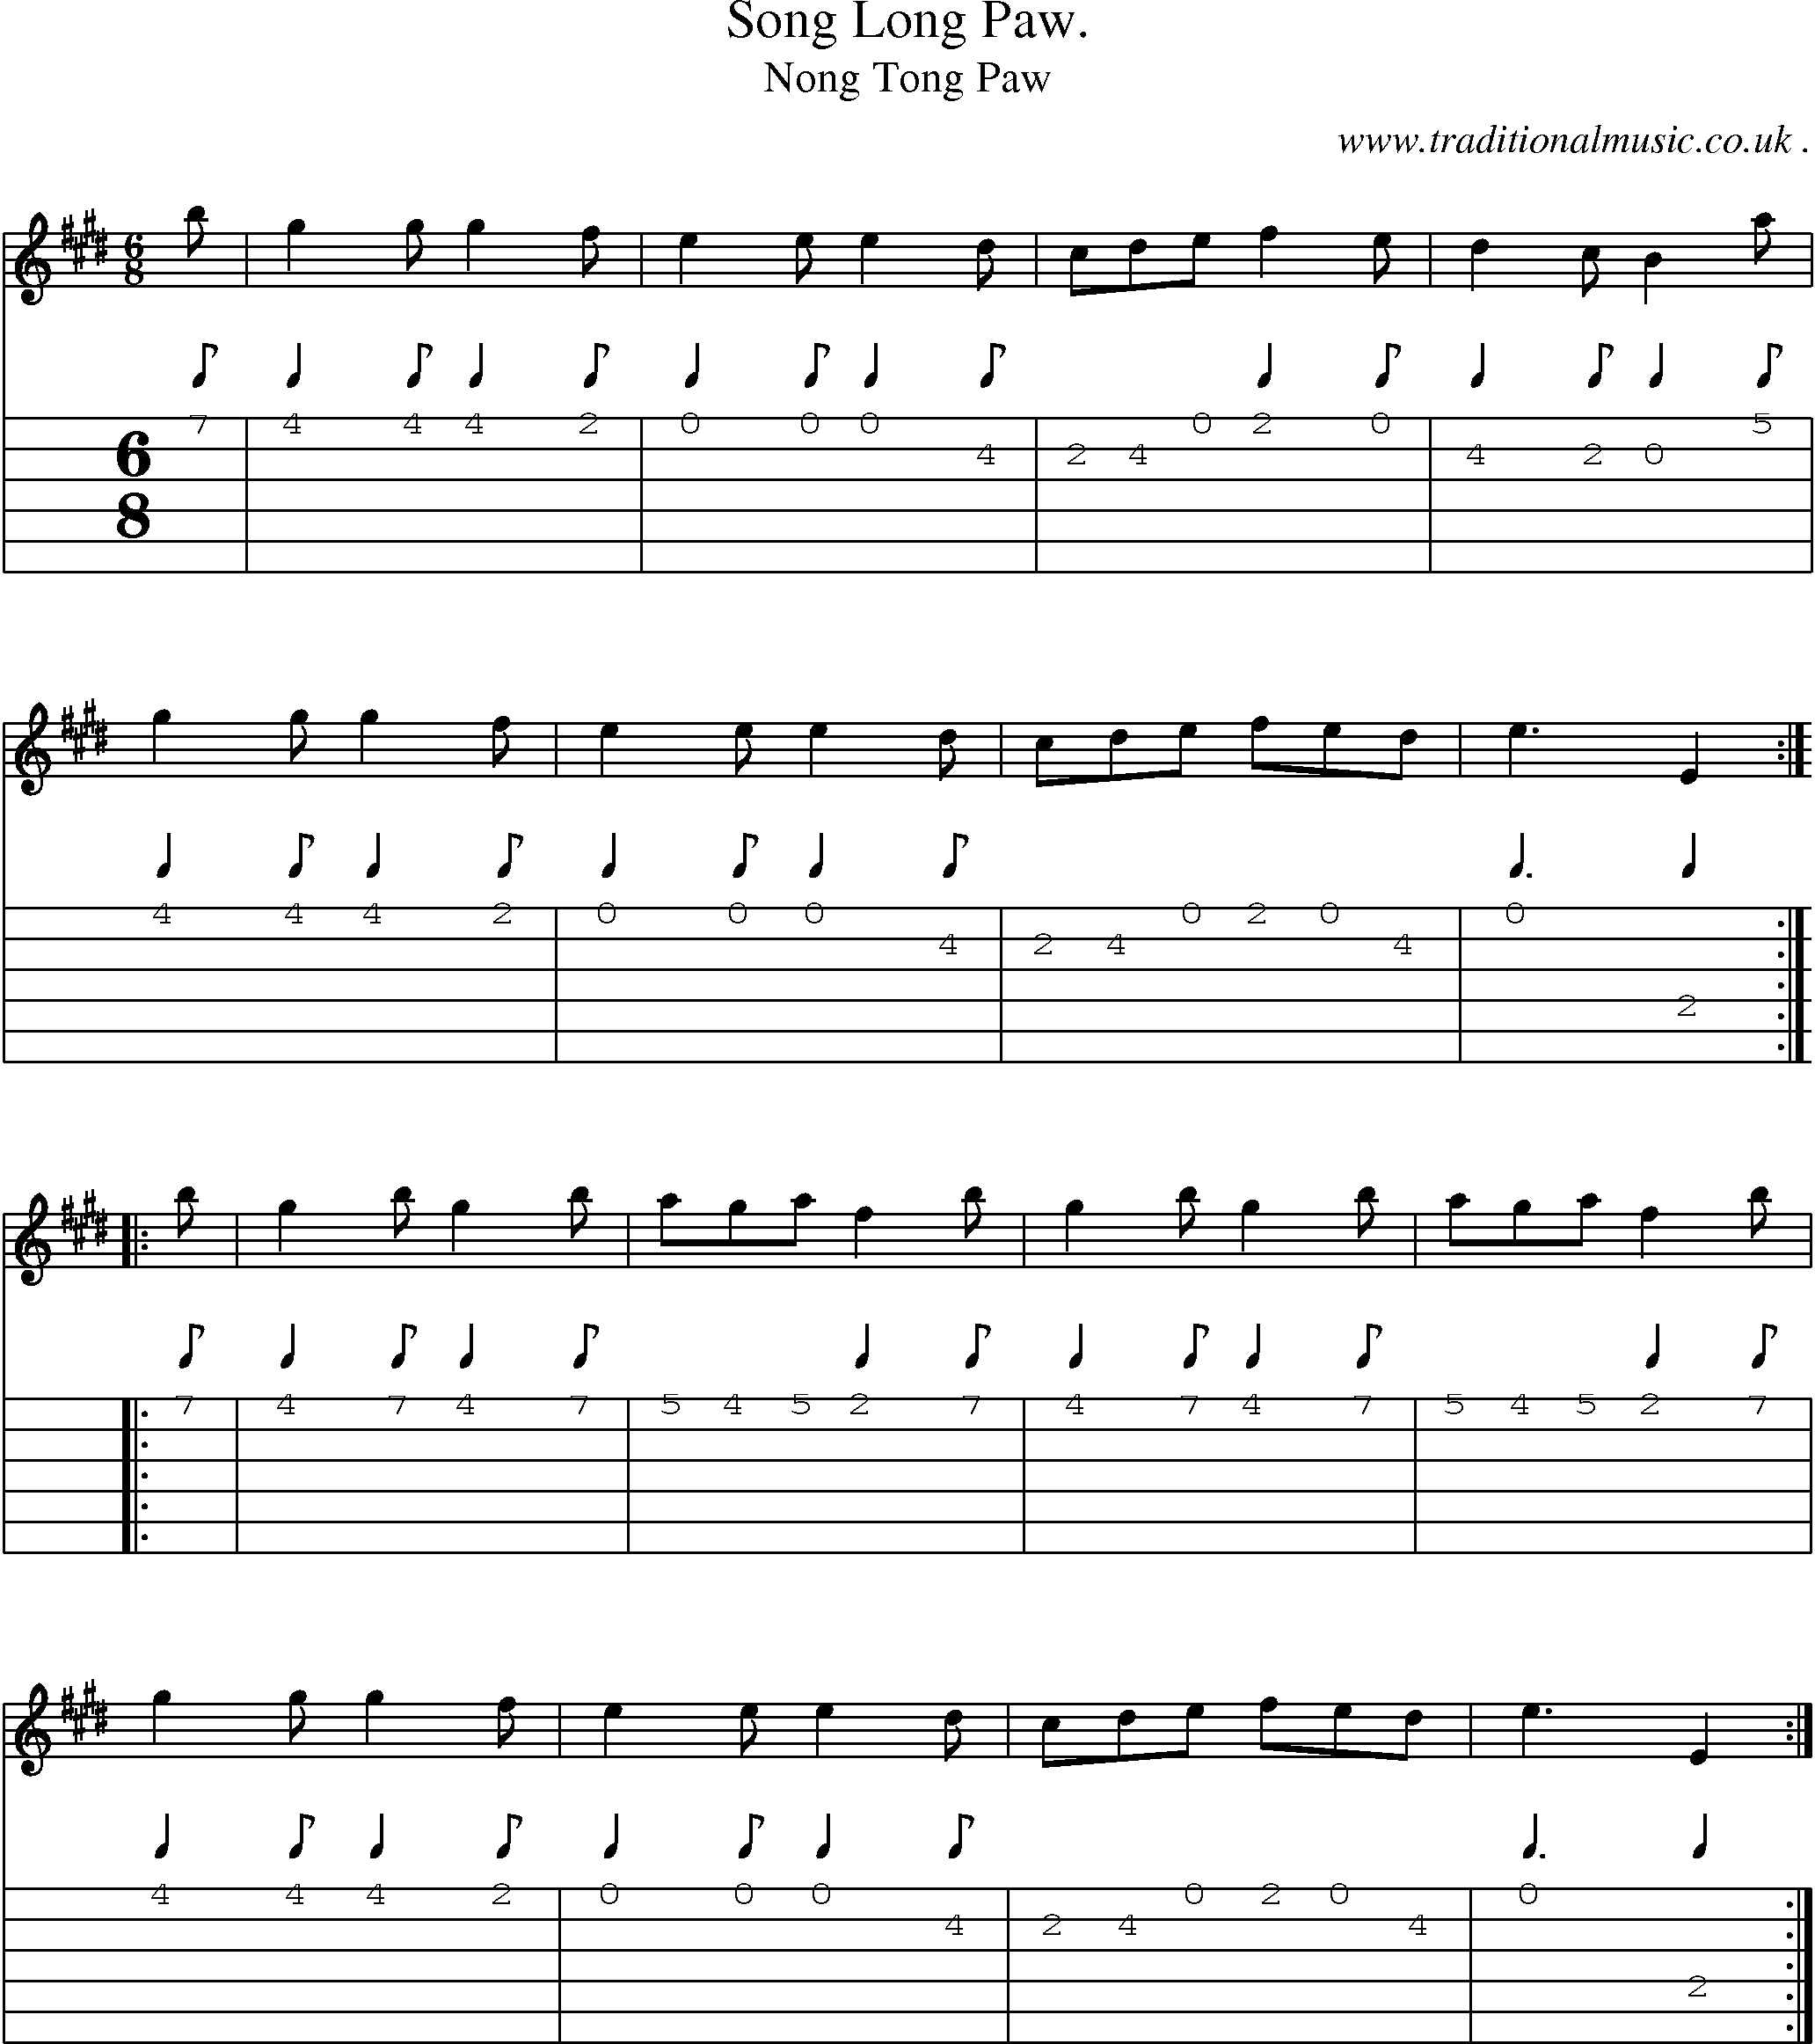 Sheet-Music and Guitar Tabs for Song Long Paw